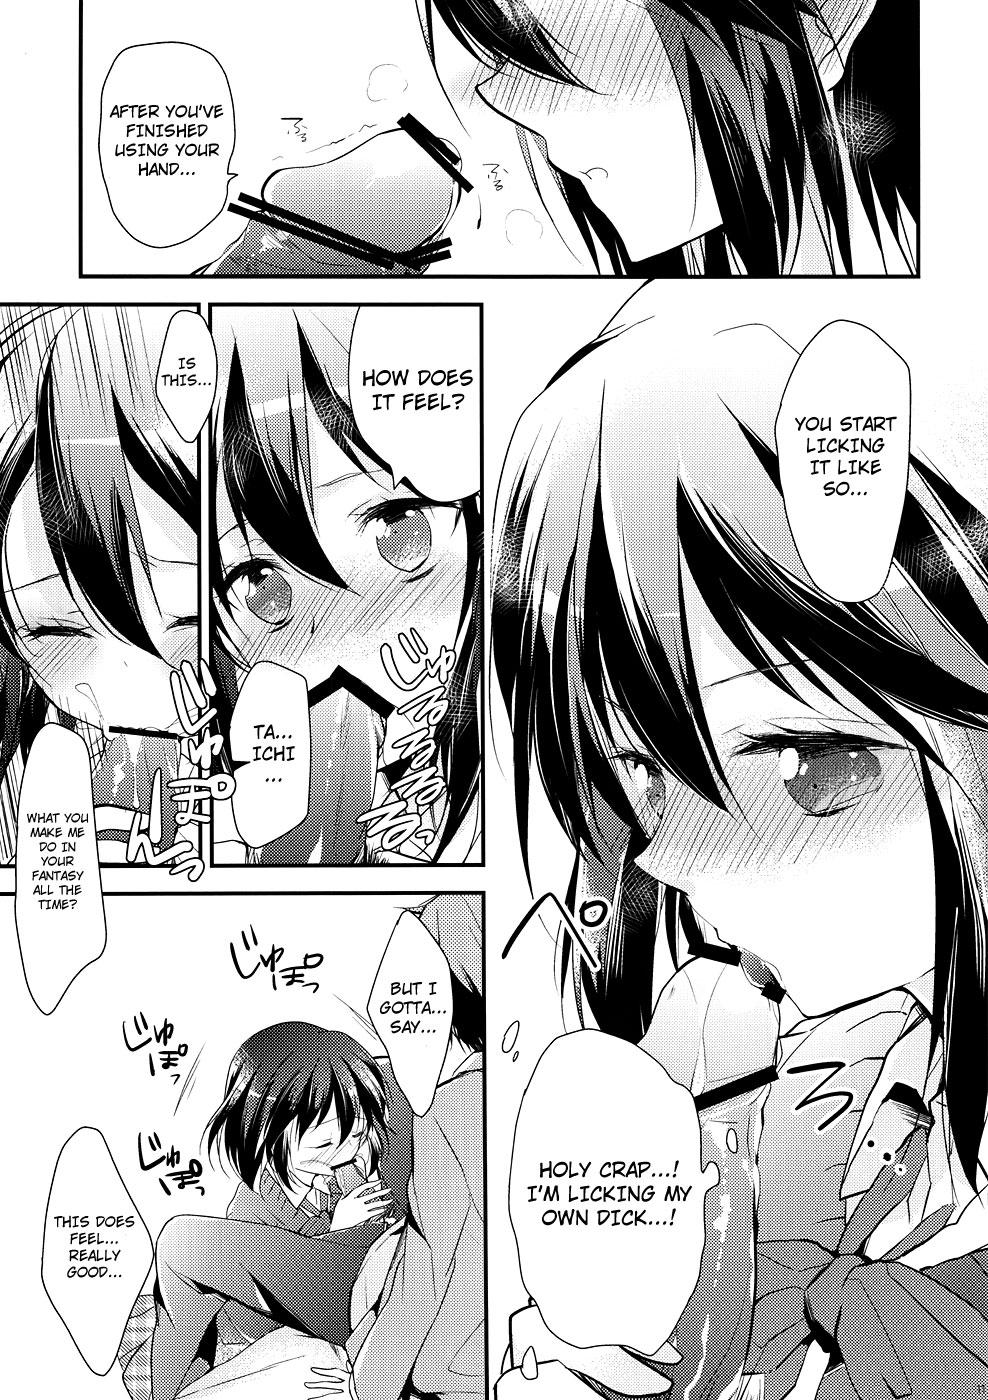 Gay Shitagokoro Connect | Secret Intention Connect - Kokoro connect Free Amatuer Porn - Page 10